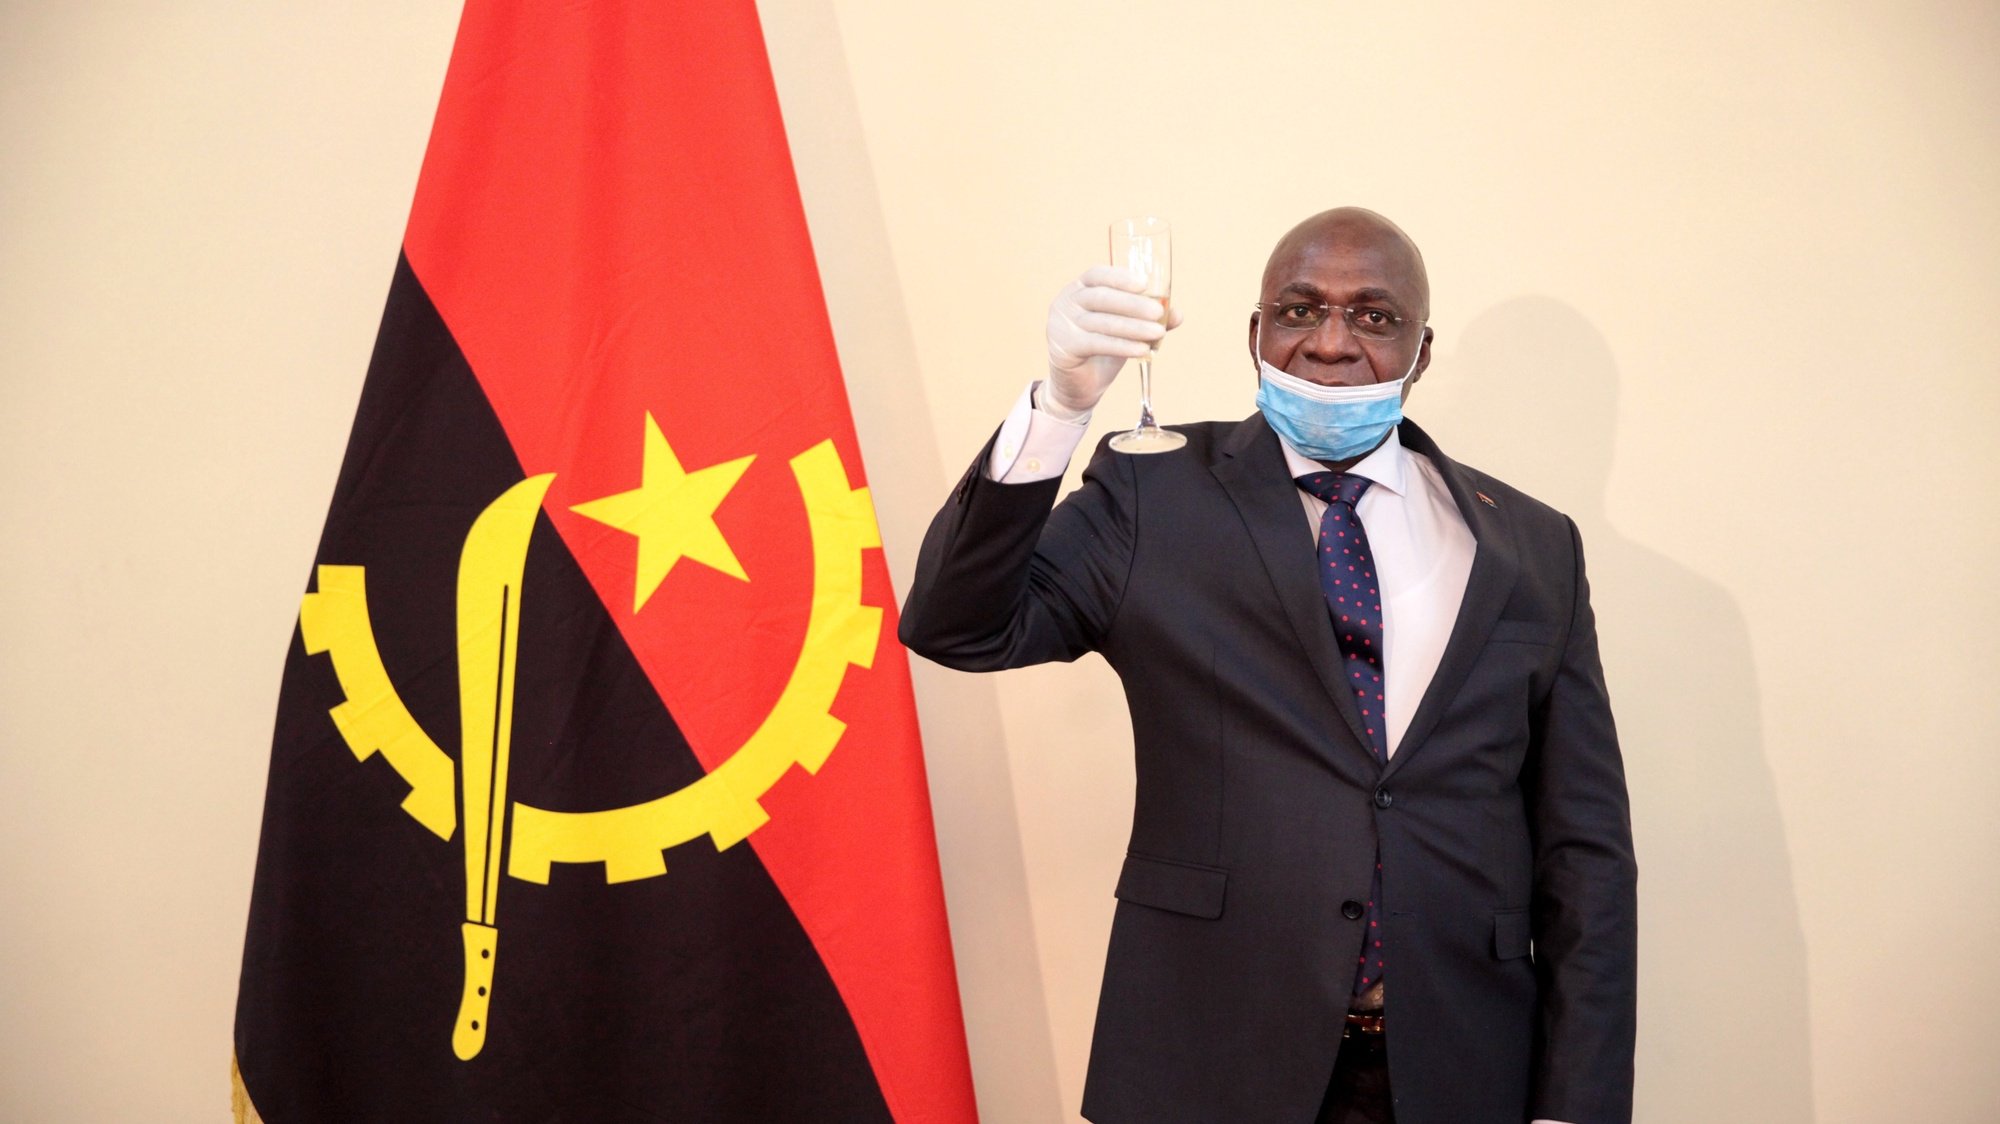 epa08354026 New Angolan Foreign Afairs Minister Tete Antonio makes a toast during his swearing-in ceremony at the Foreign Affairs Ministry in Luanda, Angola, 09 April 2020.  EPA/AMPE ROGERIO